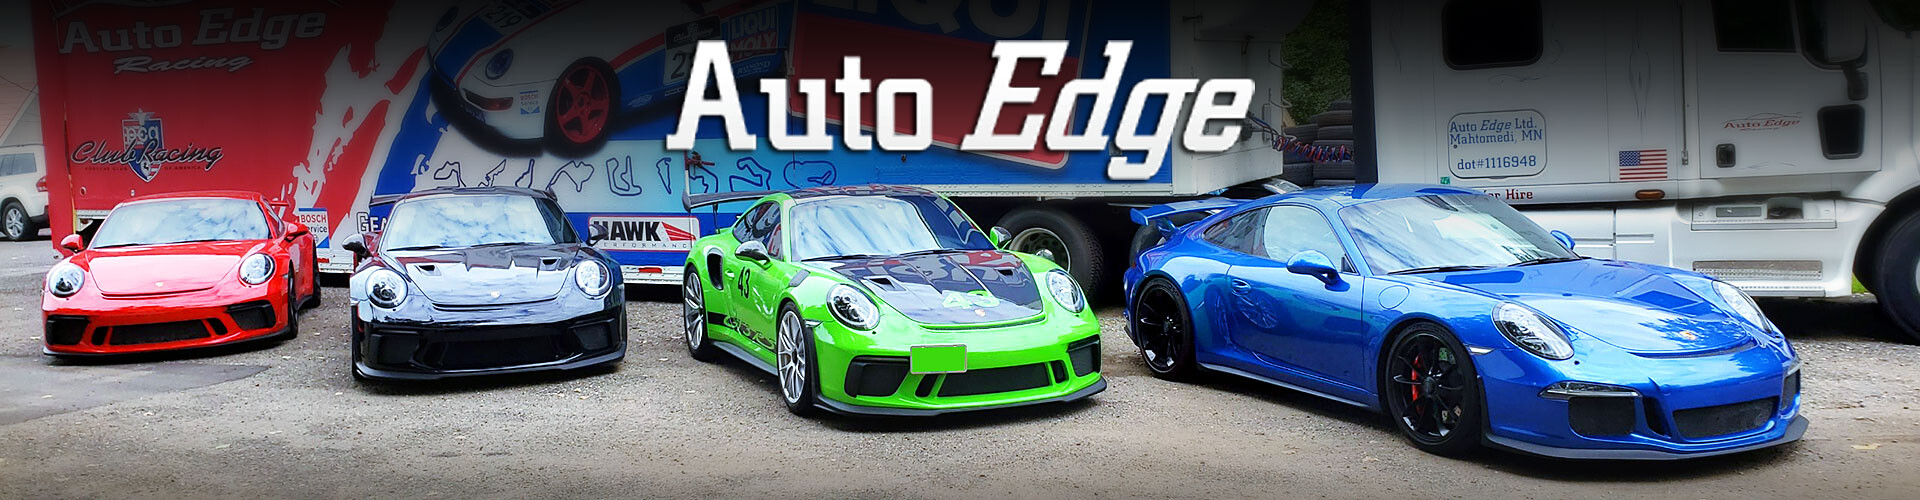 Porsche Repair in Minneapolis, MN by Auto Edge a leading Porsche repair specialist in Minnesota specializing in Porsche repair, maintenance, performance tuning and service.